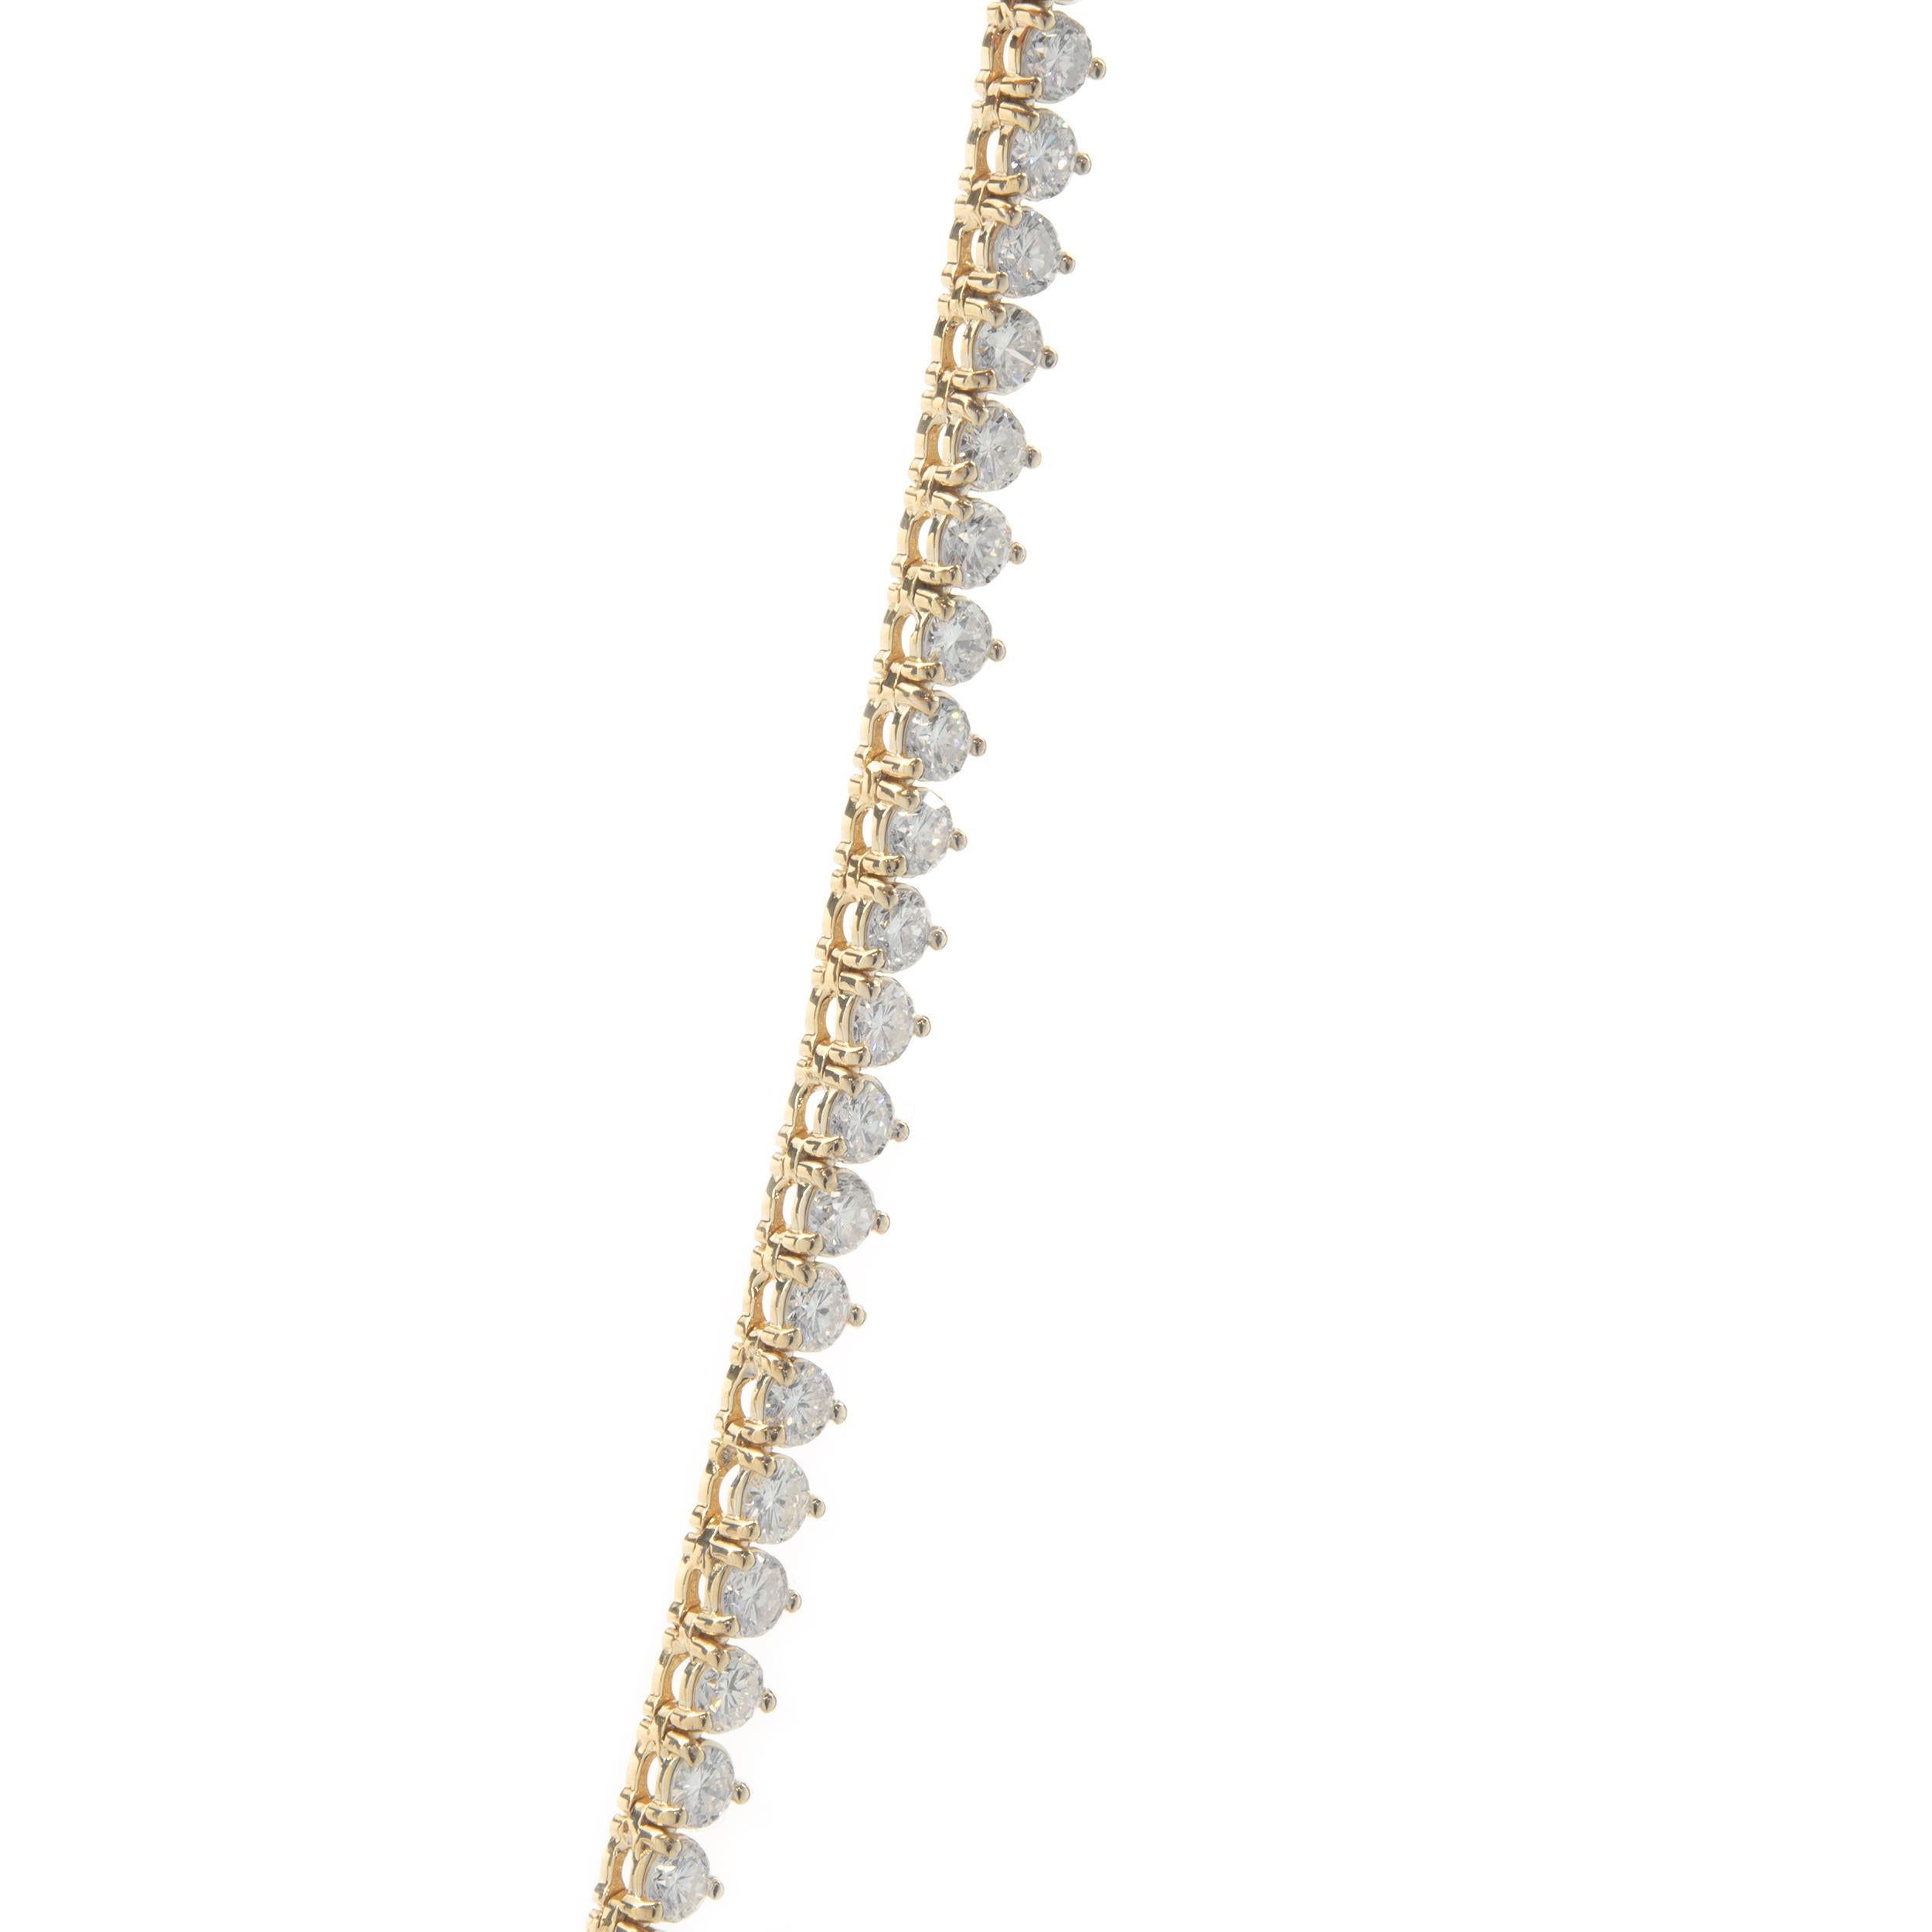 Designer: custom design
Material: 18K yellow gold
Diamond: 142 round brilliant cut = 10.01cttw
Color: G
Clarity: VS2
Dimensions: necklace measures 17-inches in length 
Weight: 21.77 grams